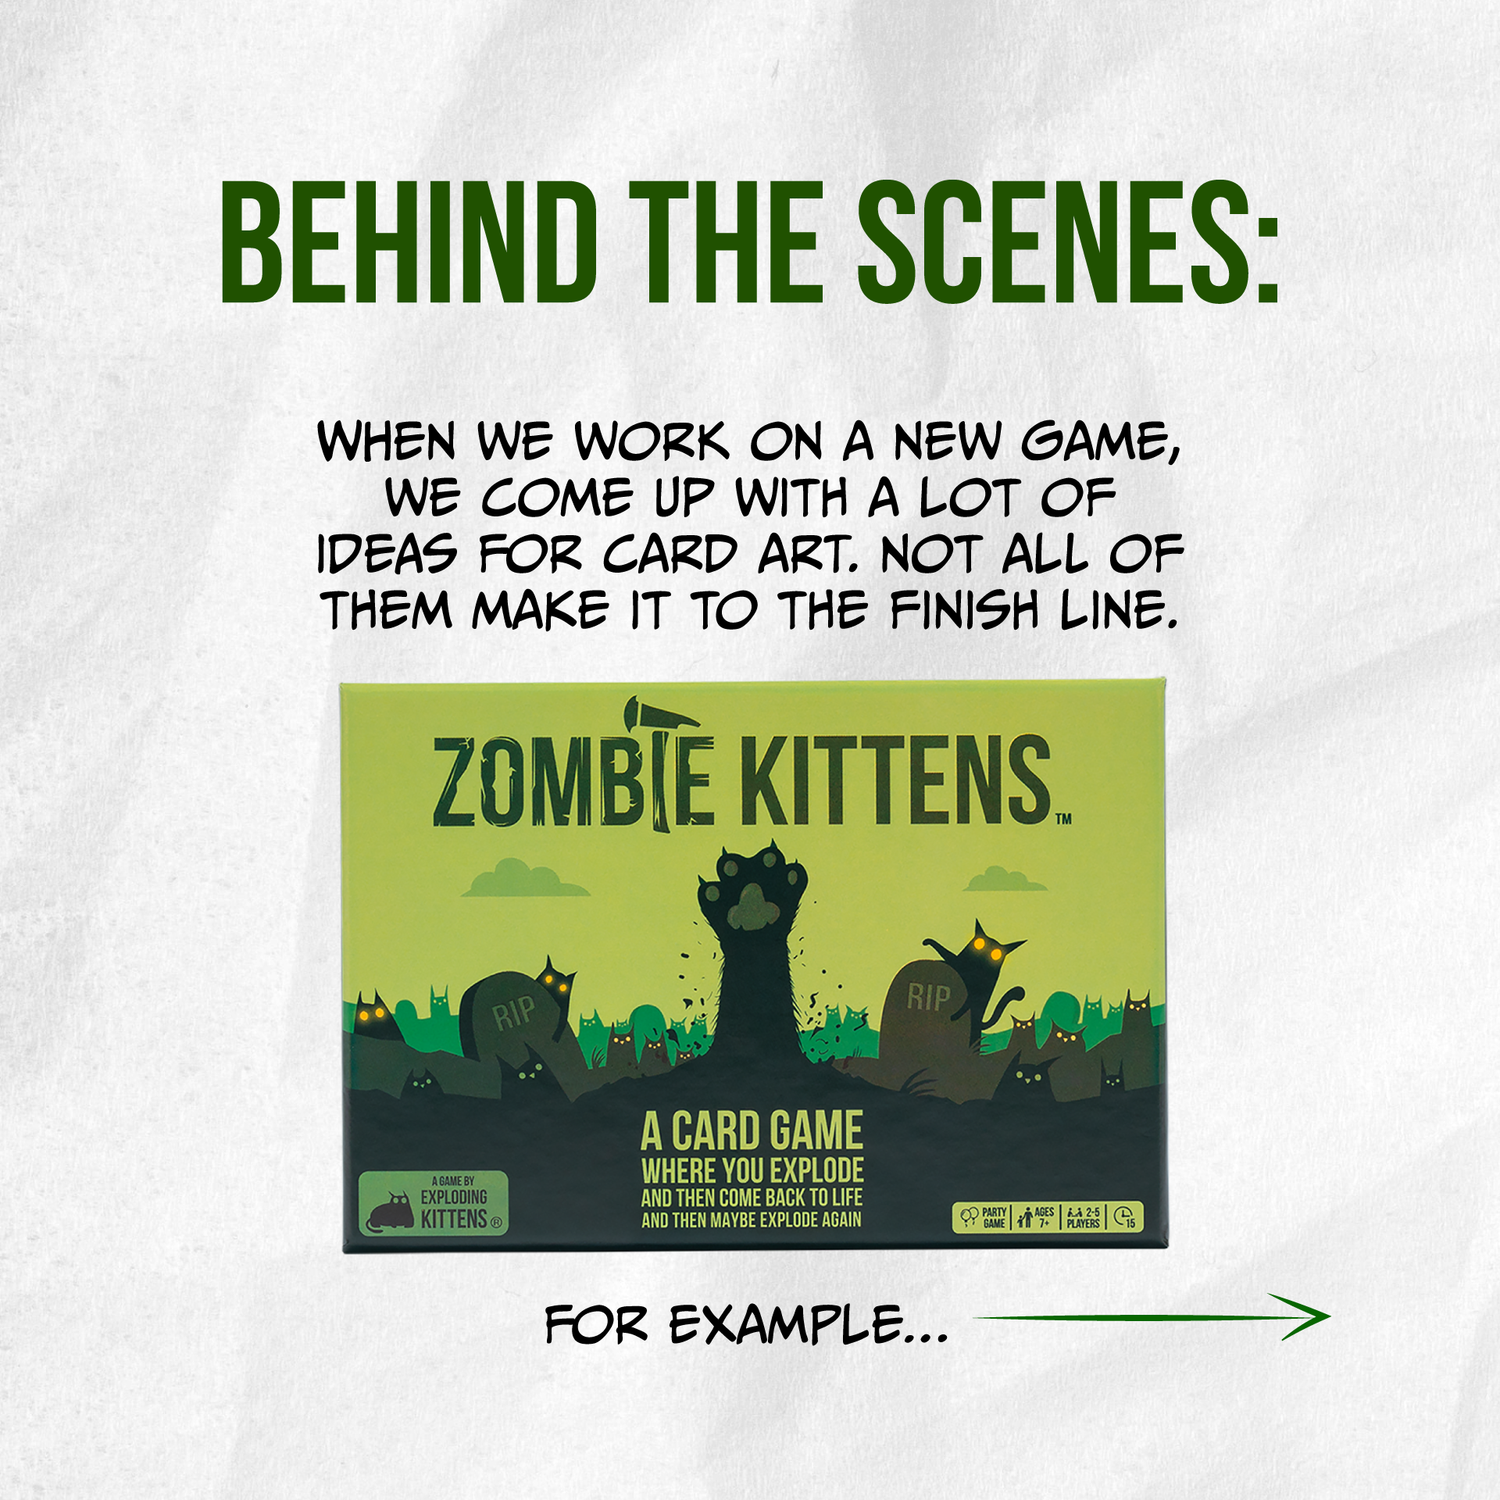 Behind the Scenes of Zombie Kittens